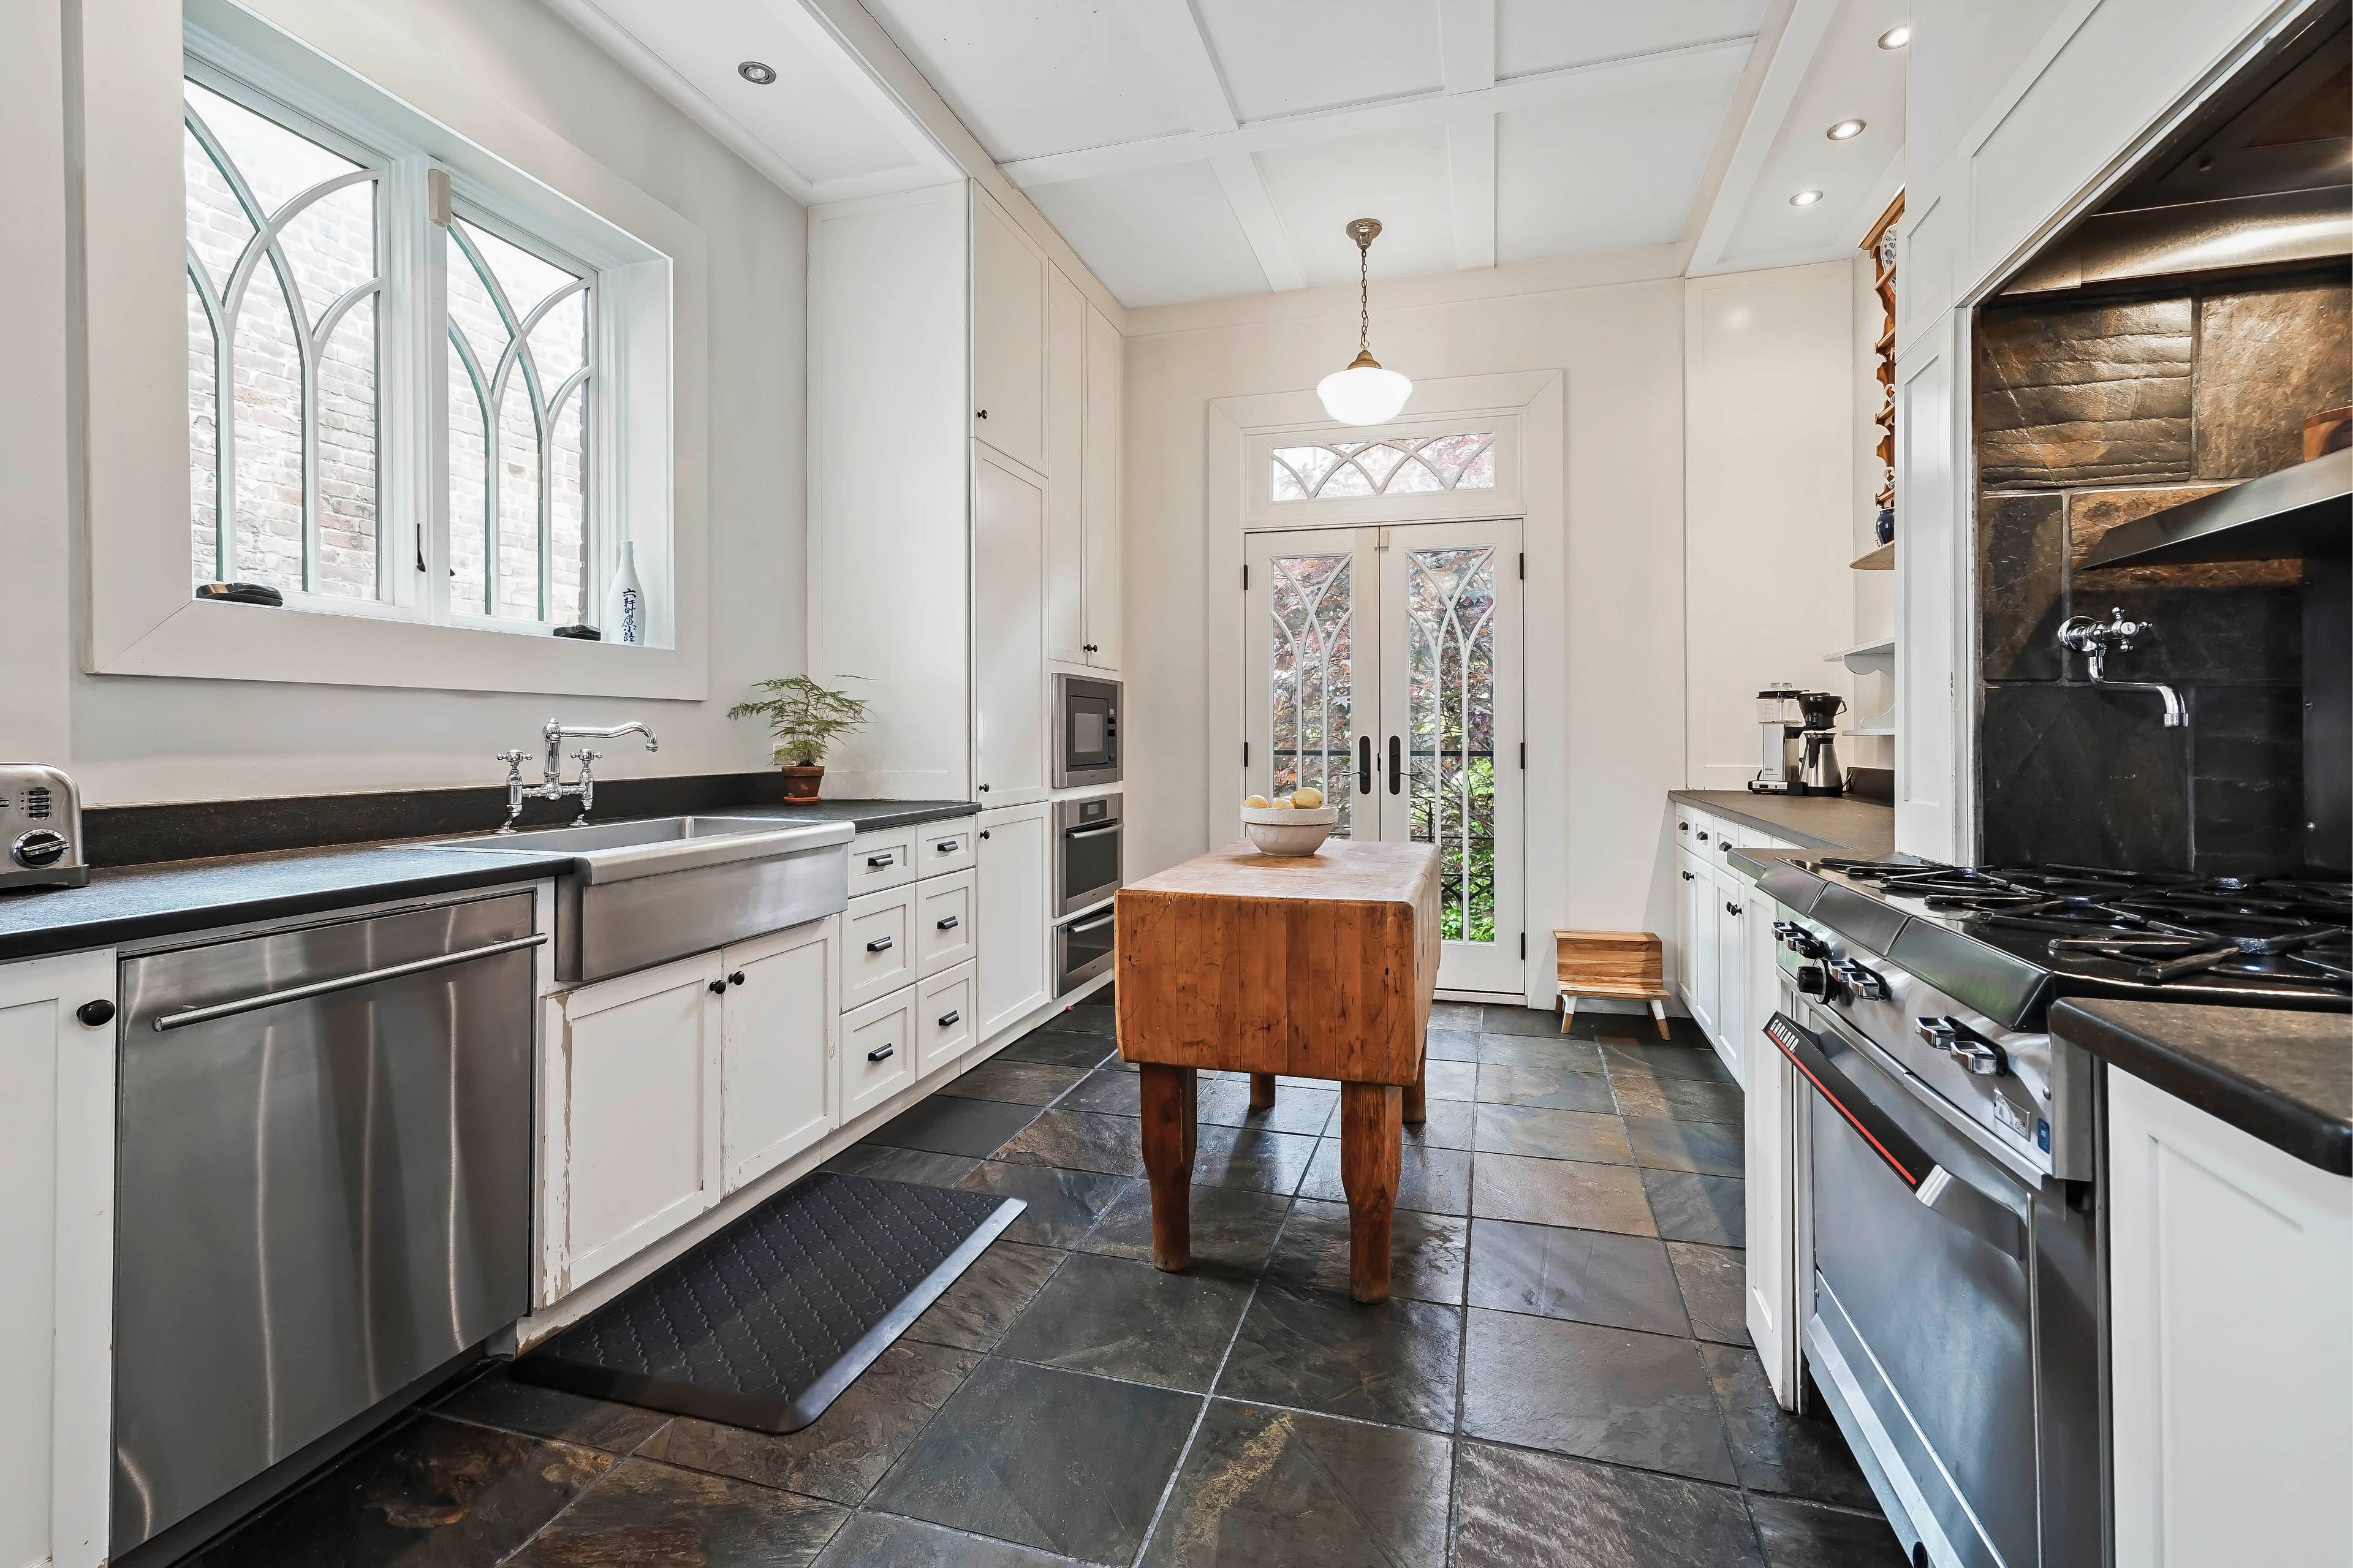 Graceful Park Block Townhouse Found among a majestic row of townhouses steps from Prospect Park, this exquisite home is without doubt quintessential Park Slope, Brooklyn.